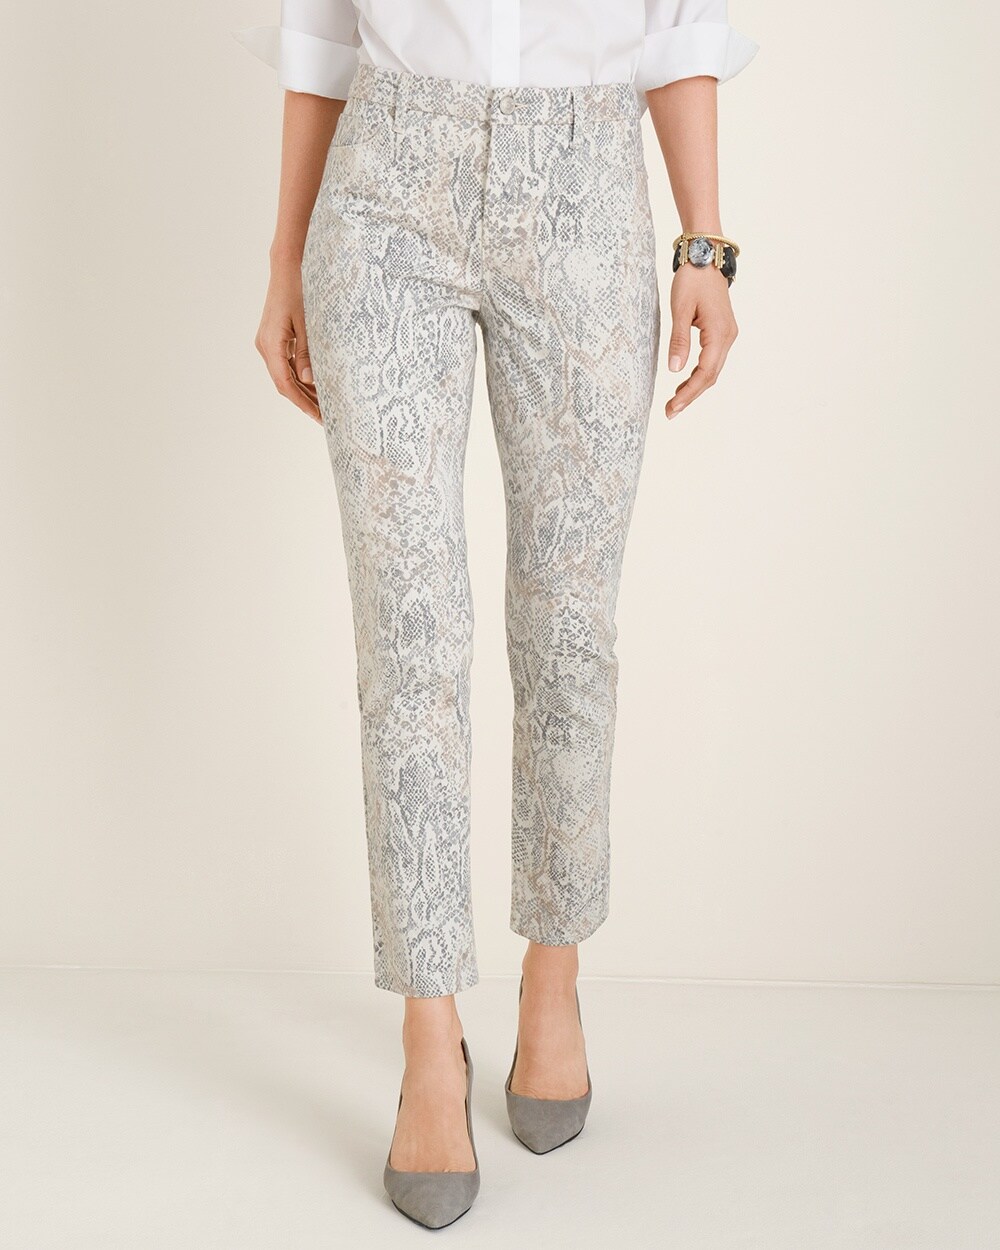 So Slimming Python-Print Girlfriend Ankle Jeans